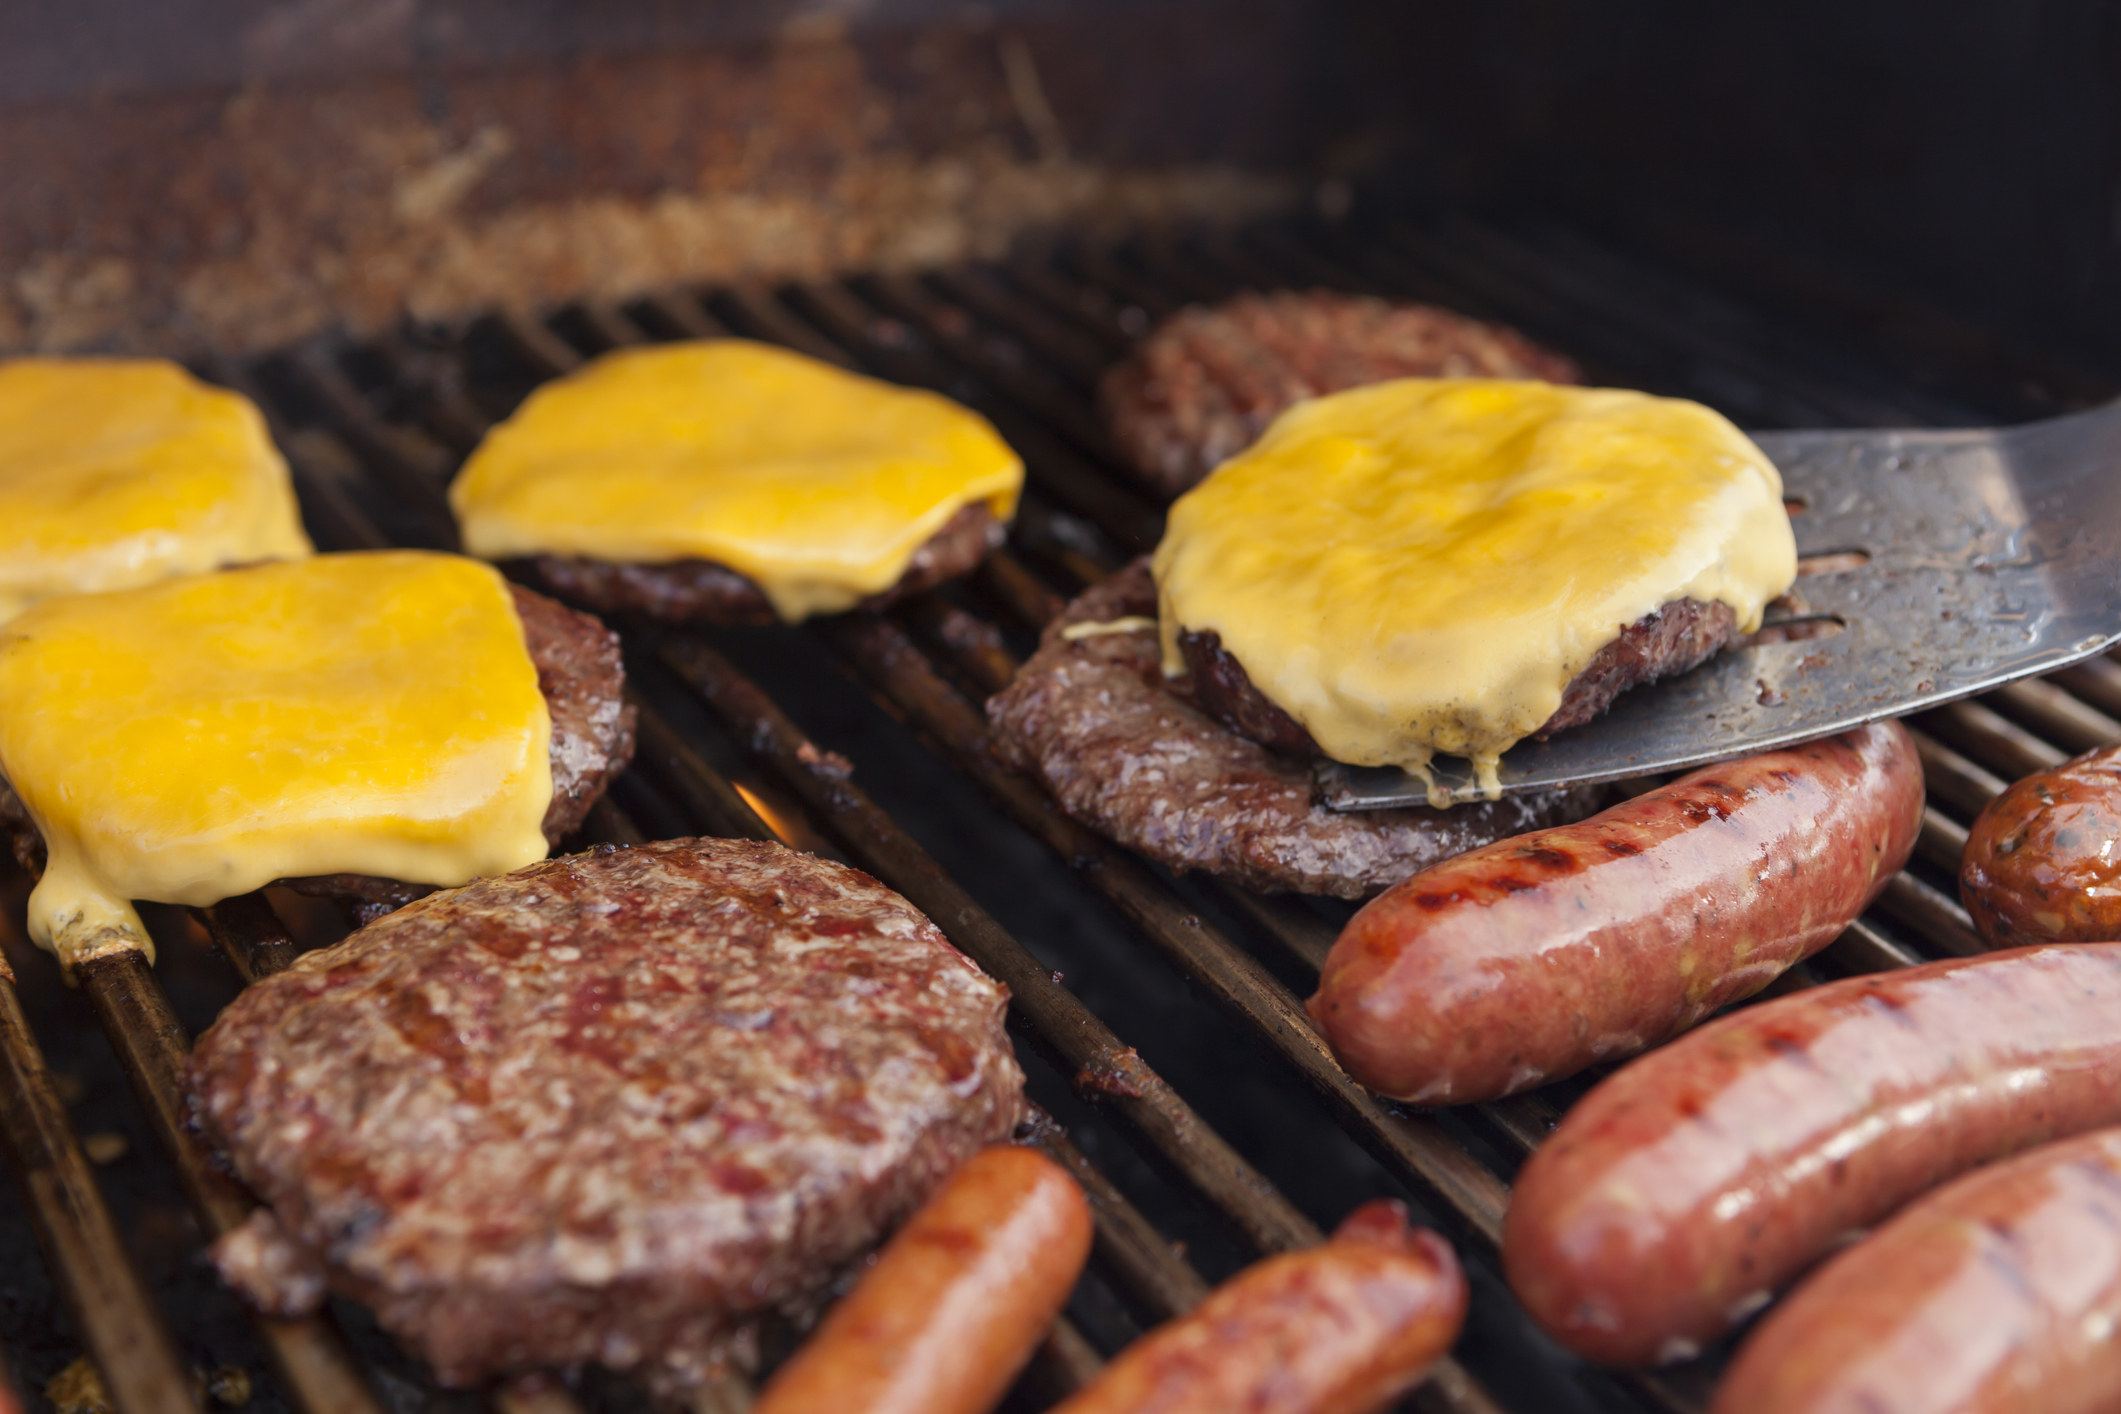 Burgers, cheeseburgers, sausage, and franks on a grill